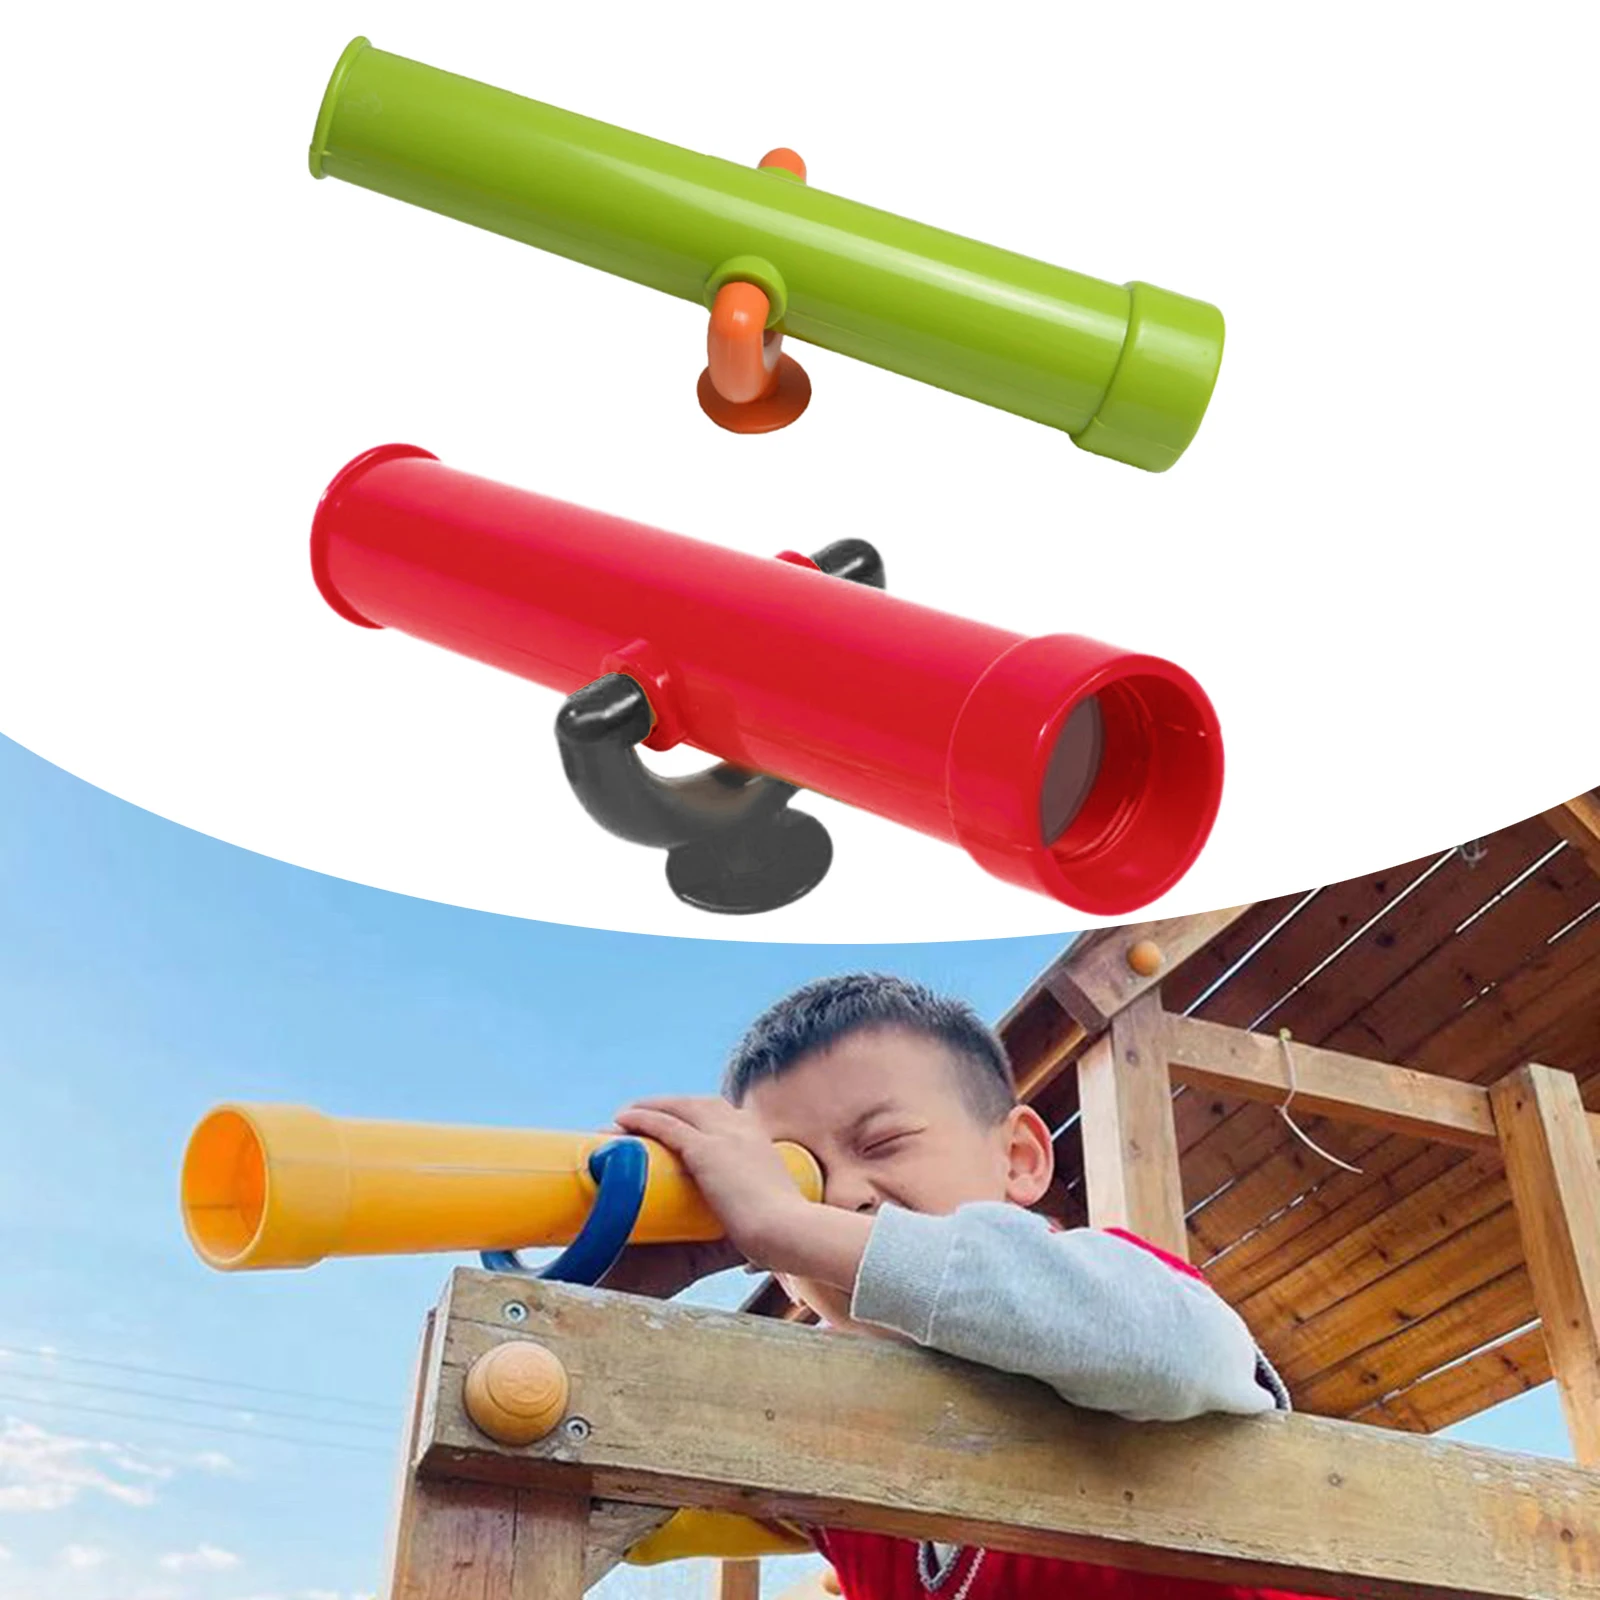 

Kids Playground Monocular Pretend Toy Playhouse Playset Swing Set Replacement Parts Accs for Kids Children Ages 3+